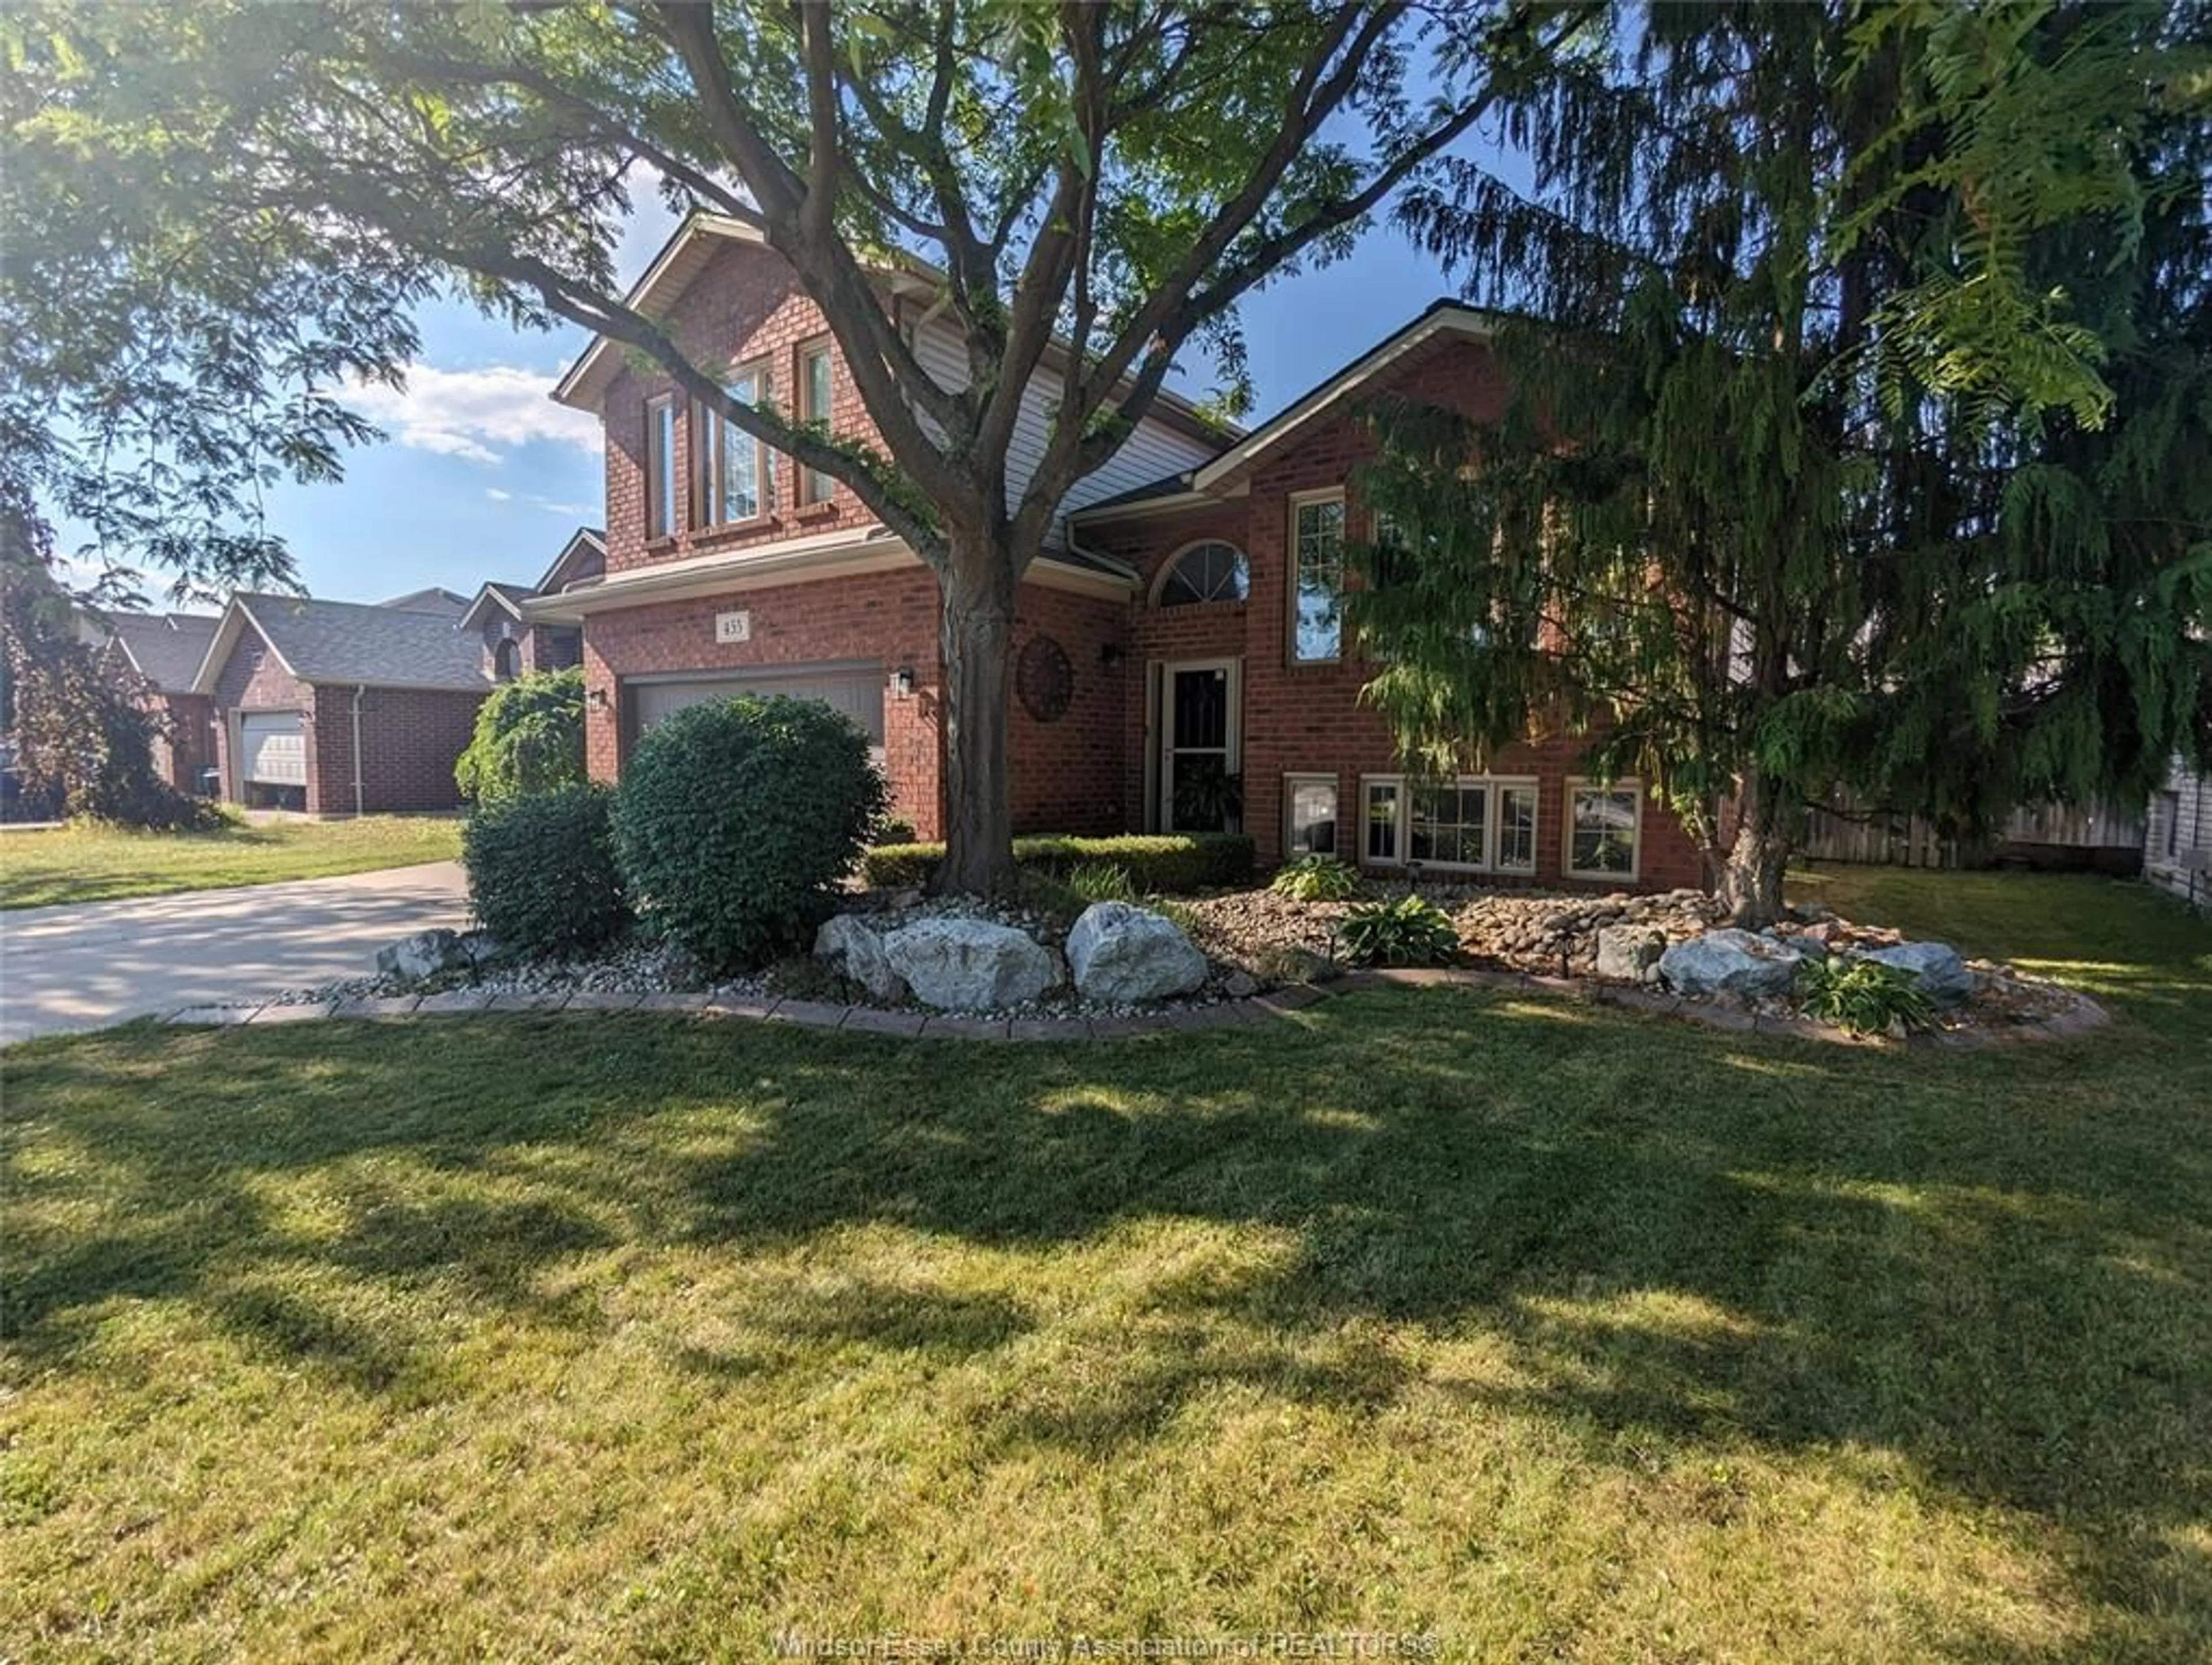 Home with brick exterior material for 455 Runstedler Dr, LaSalle Ontario N9J3X7